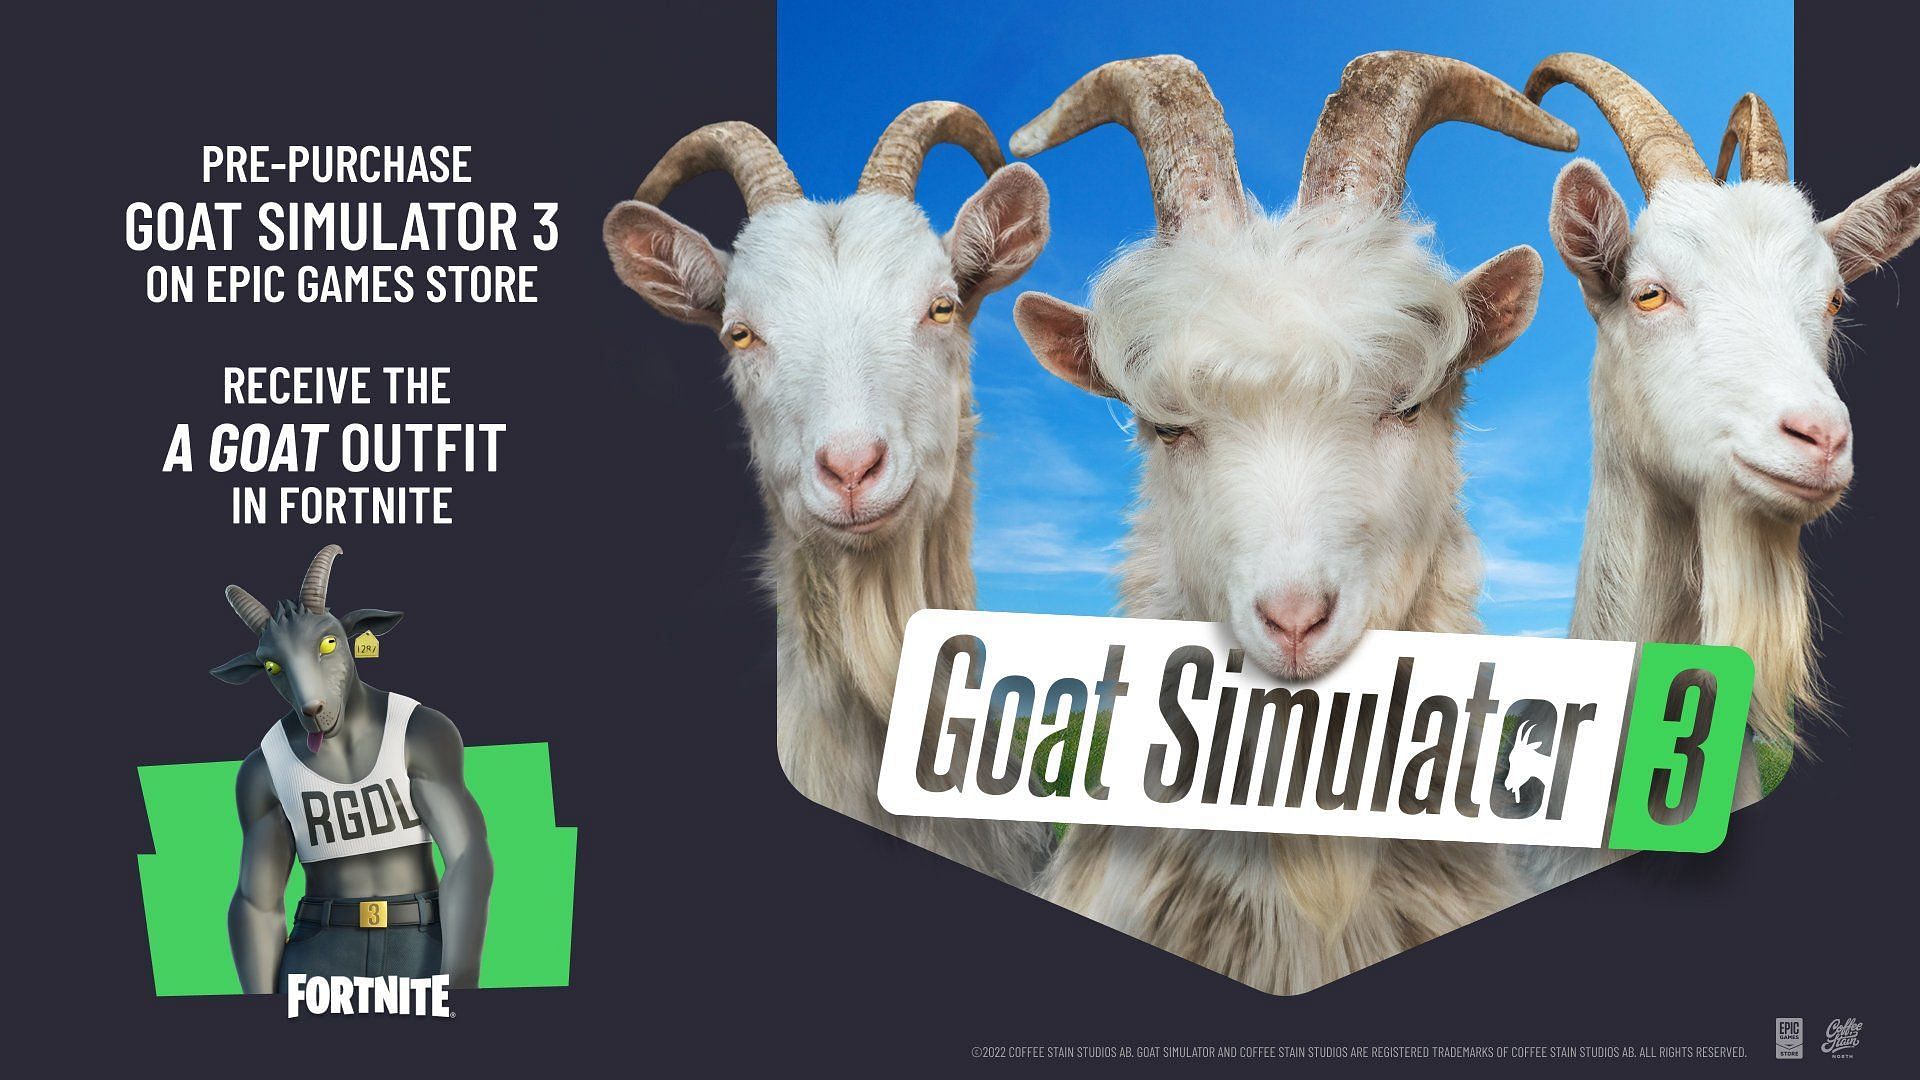 The new skin can be obtained by purchasing Goat Simulator 3 (Image via Epic Games)